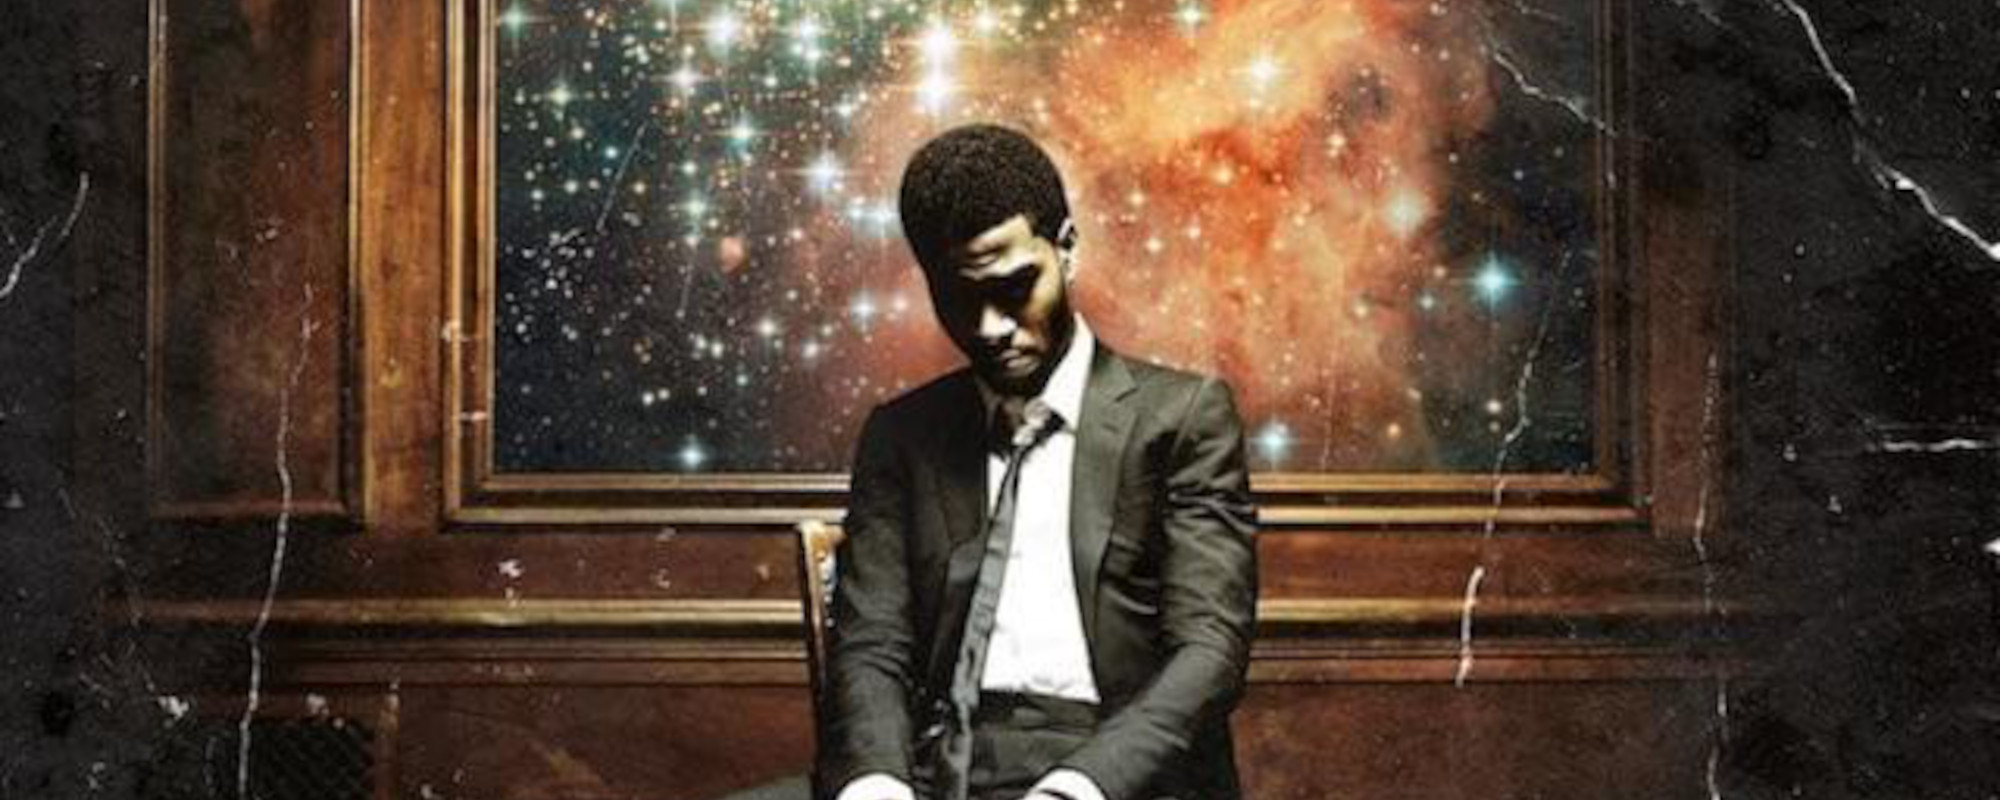 Kid Cudi Goes “To the Moon” with 2022 Tour Announcement